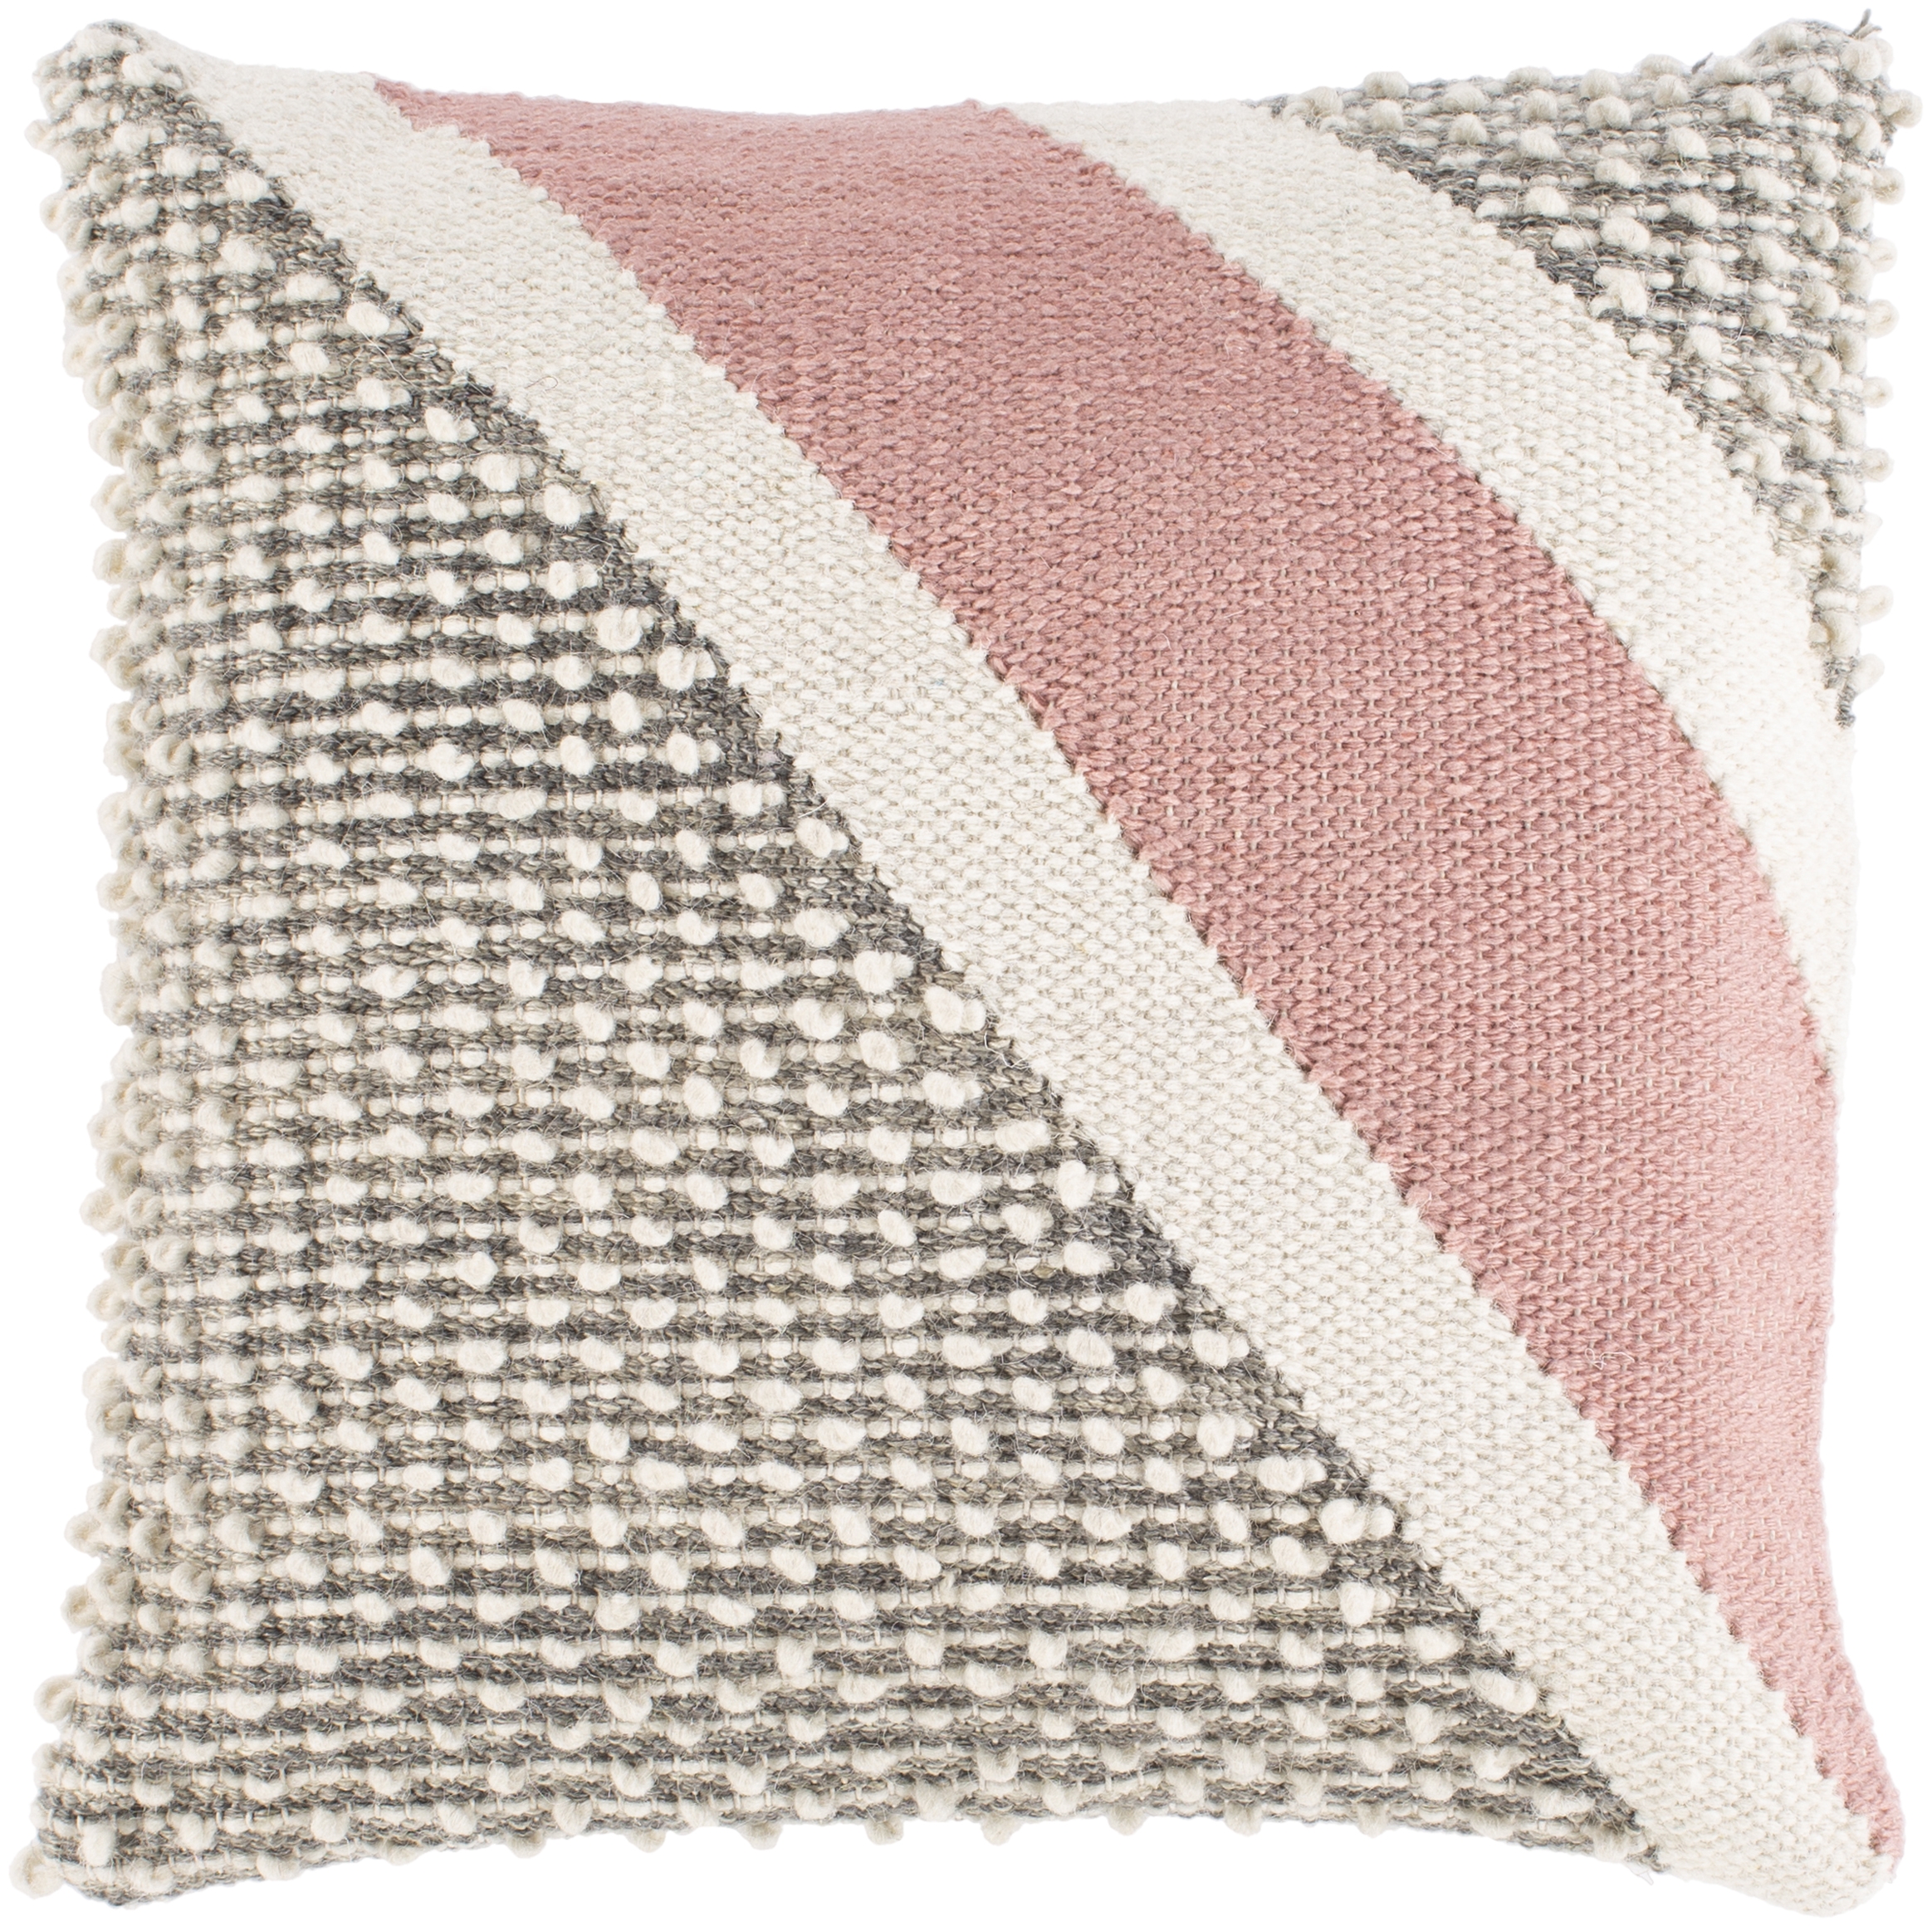 Amaretta Throw Pillow, 20" x 20", with poly insert - Image 0